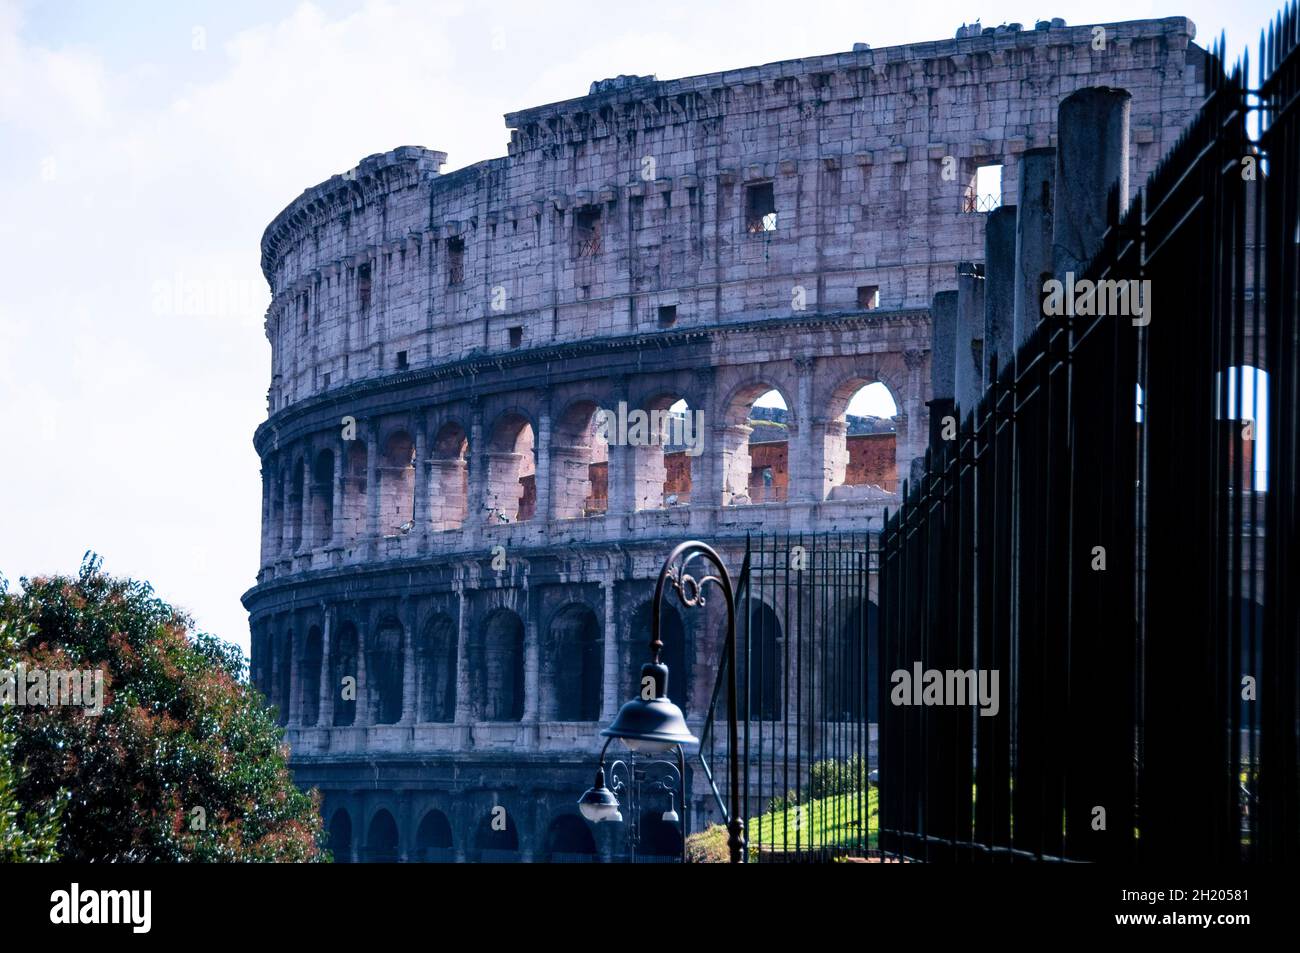 Symbol of Rome and late antiquity, the Roman Colosseum, Italy. Stock Photo